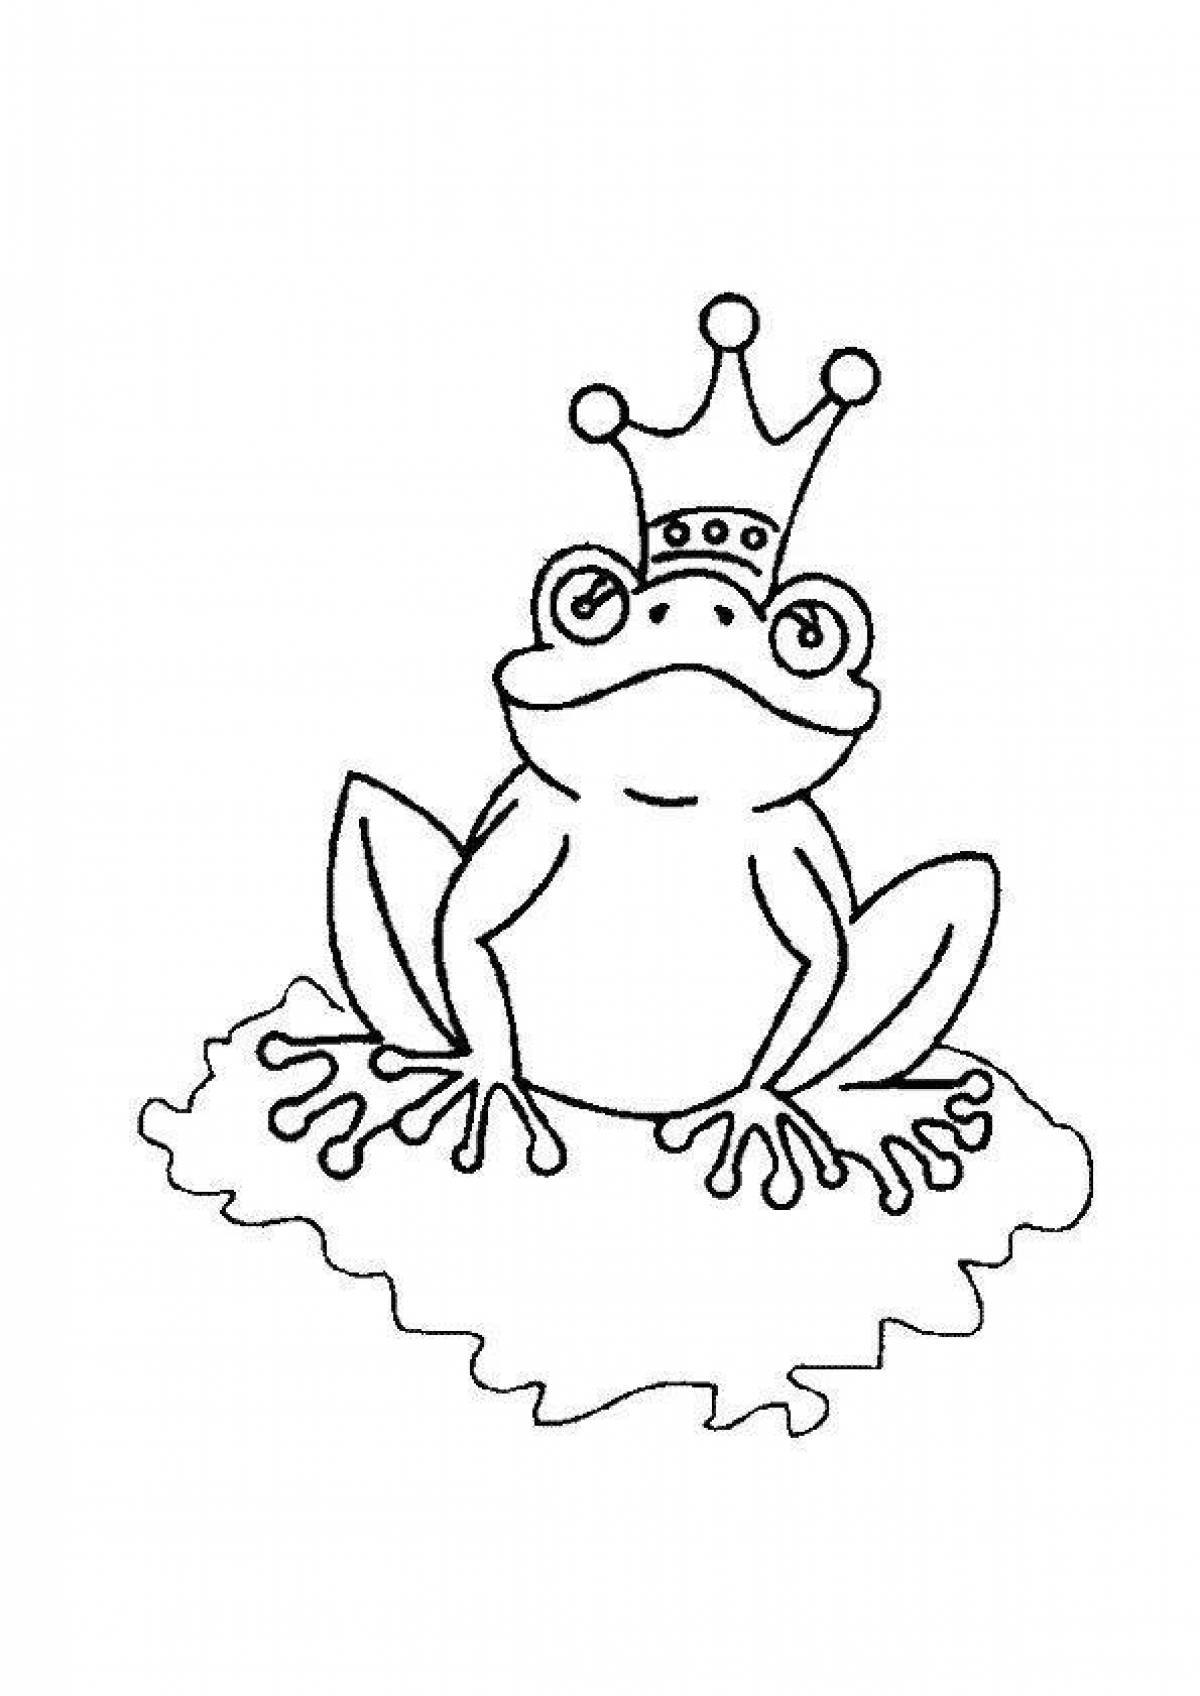 Merry frog princess coloring book for kids